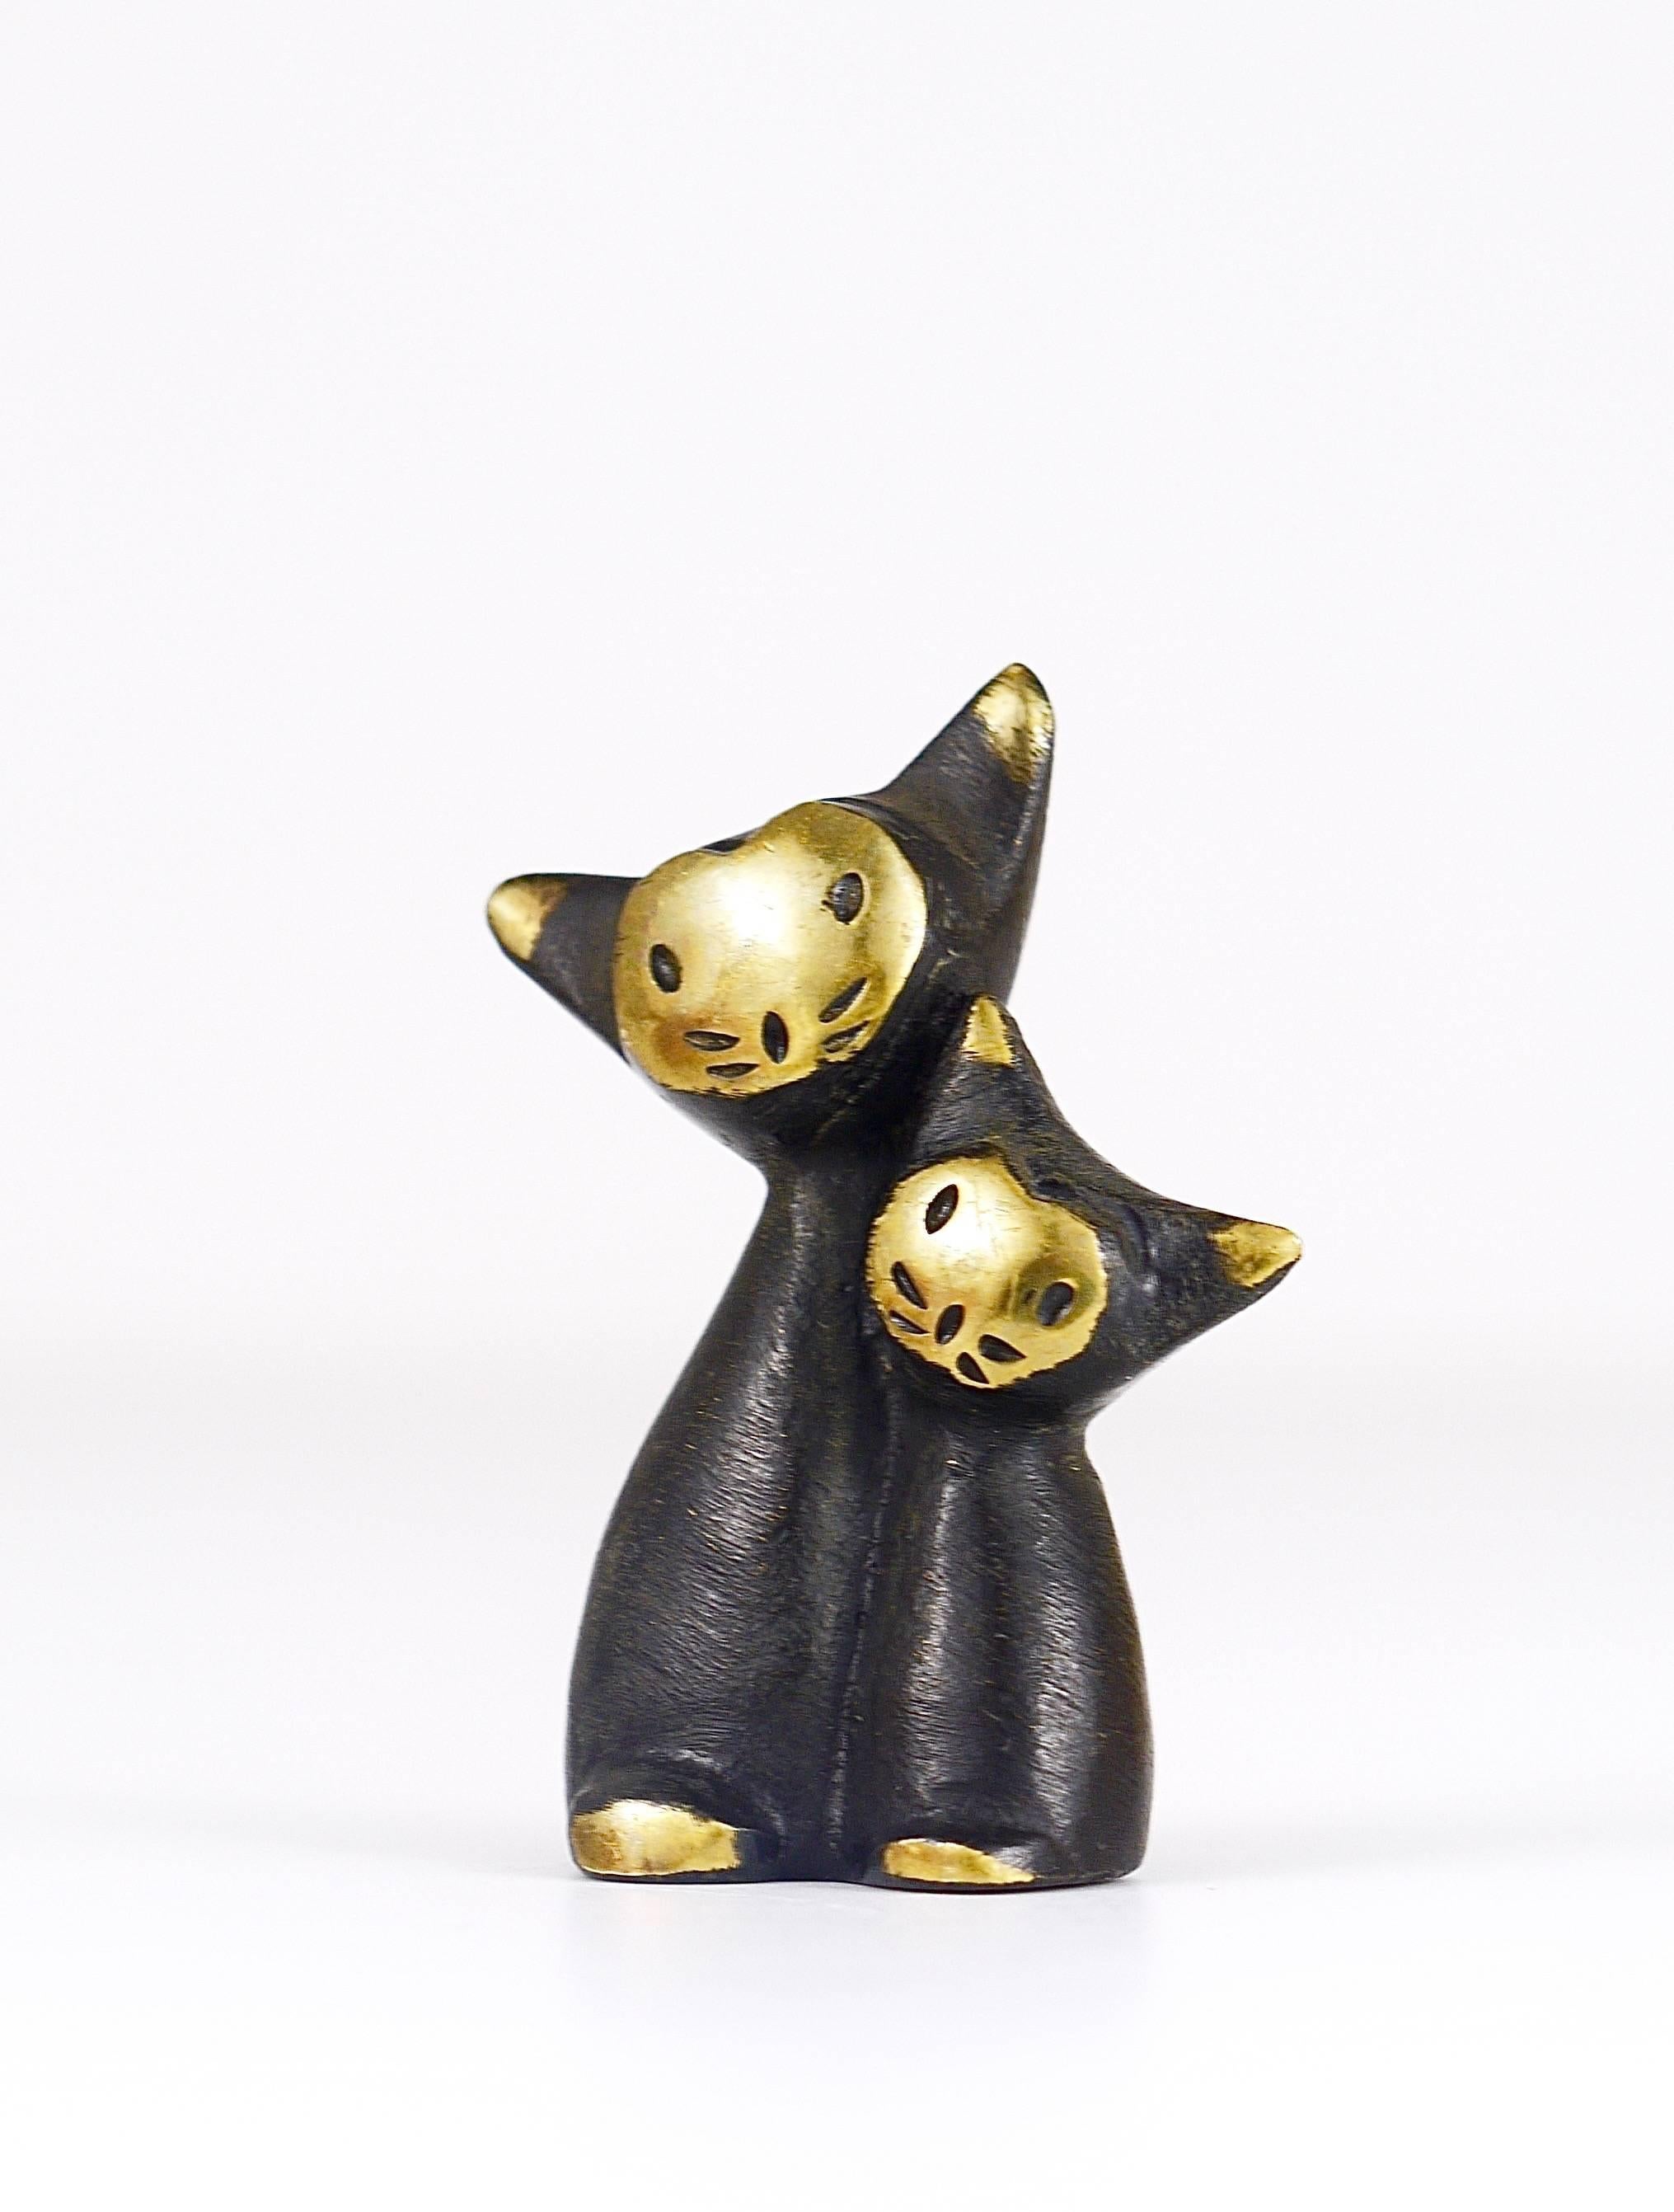 A charming cat family sculpture, displaying a cat and a kitten from the 1950s. Made of brass. A humorous design by Walter Bosse, executed by Hertha Baller Austria in the 1950s. In excellent condition. Marked.